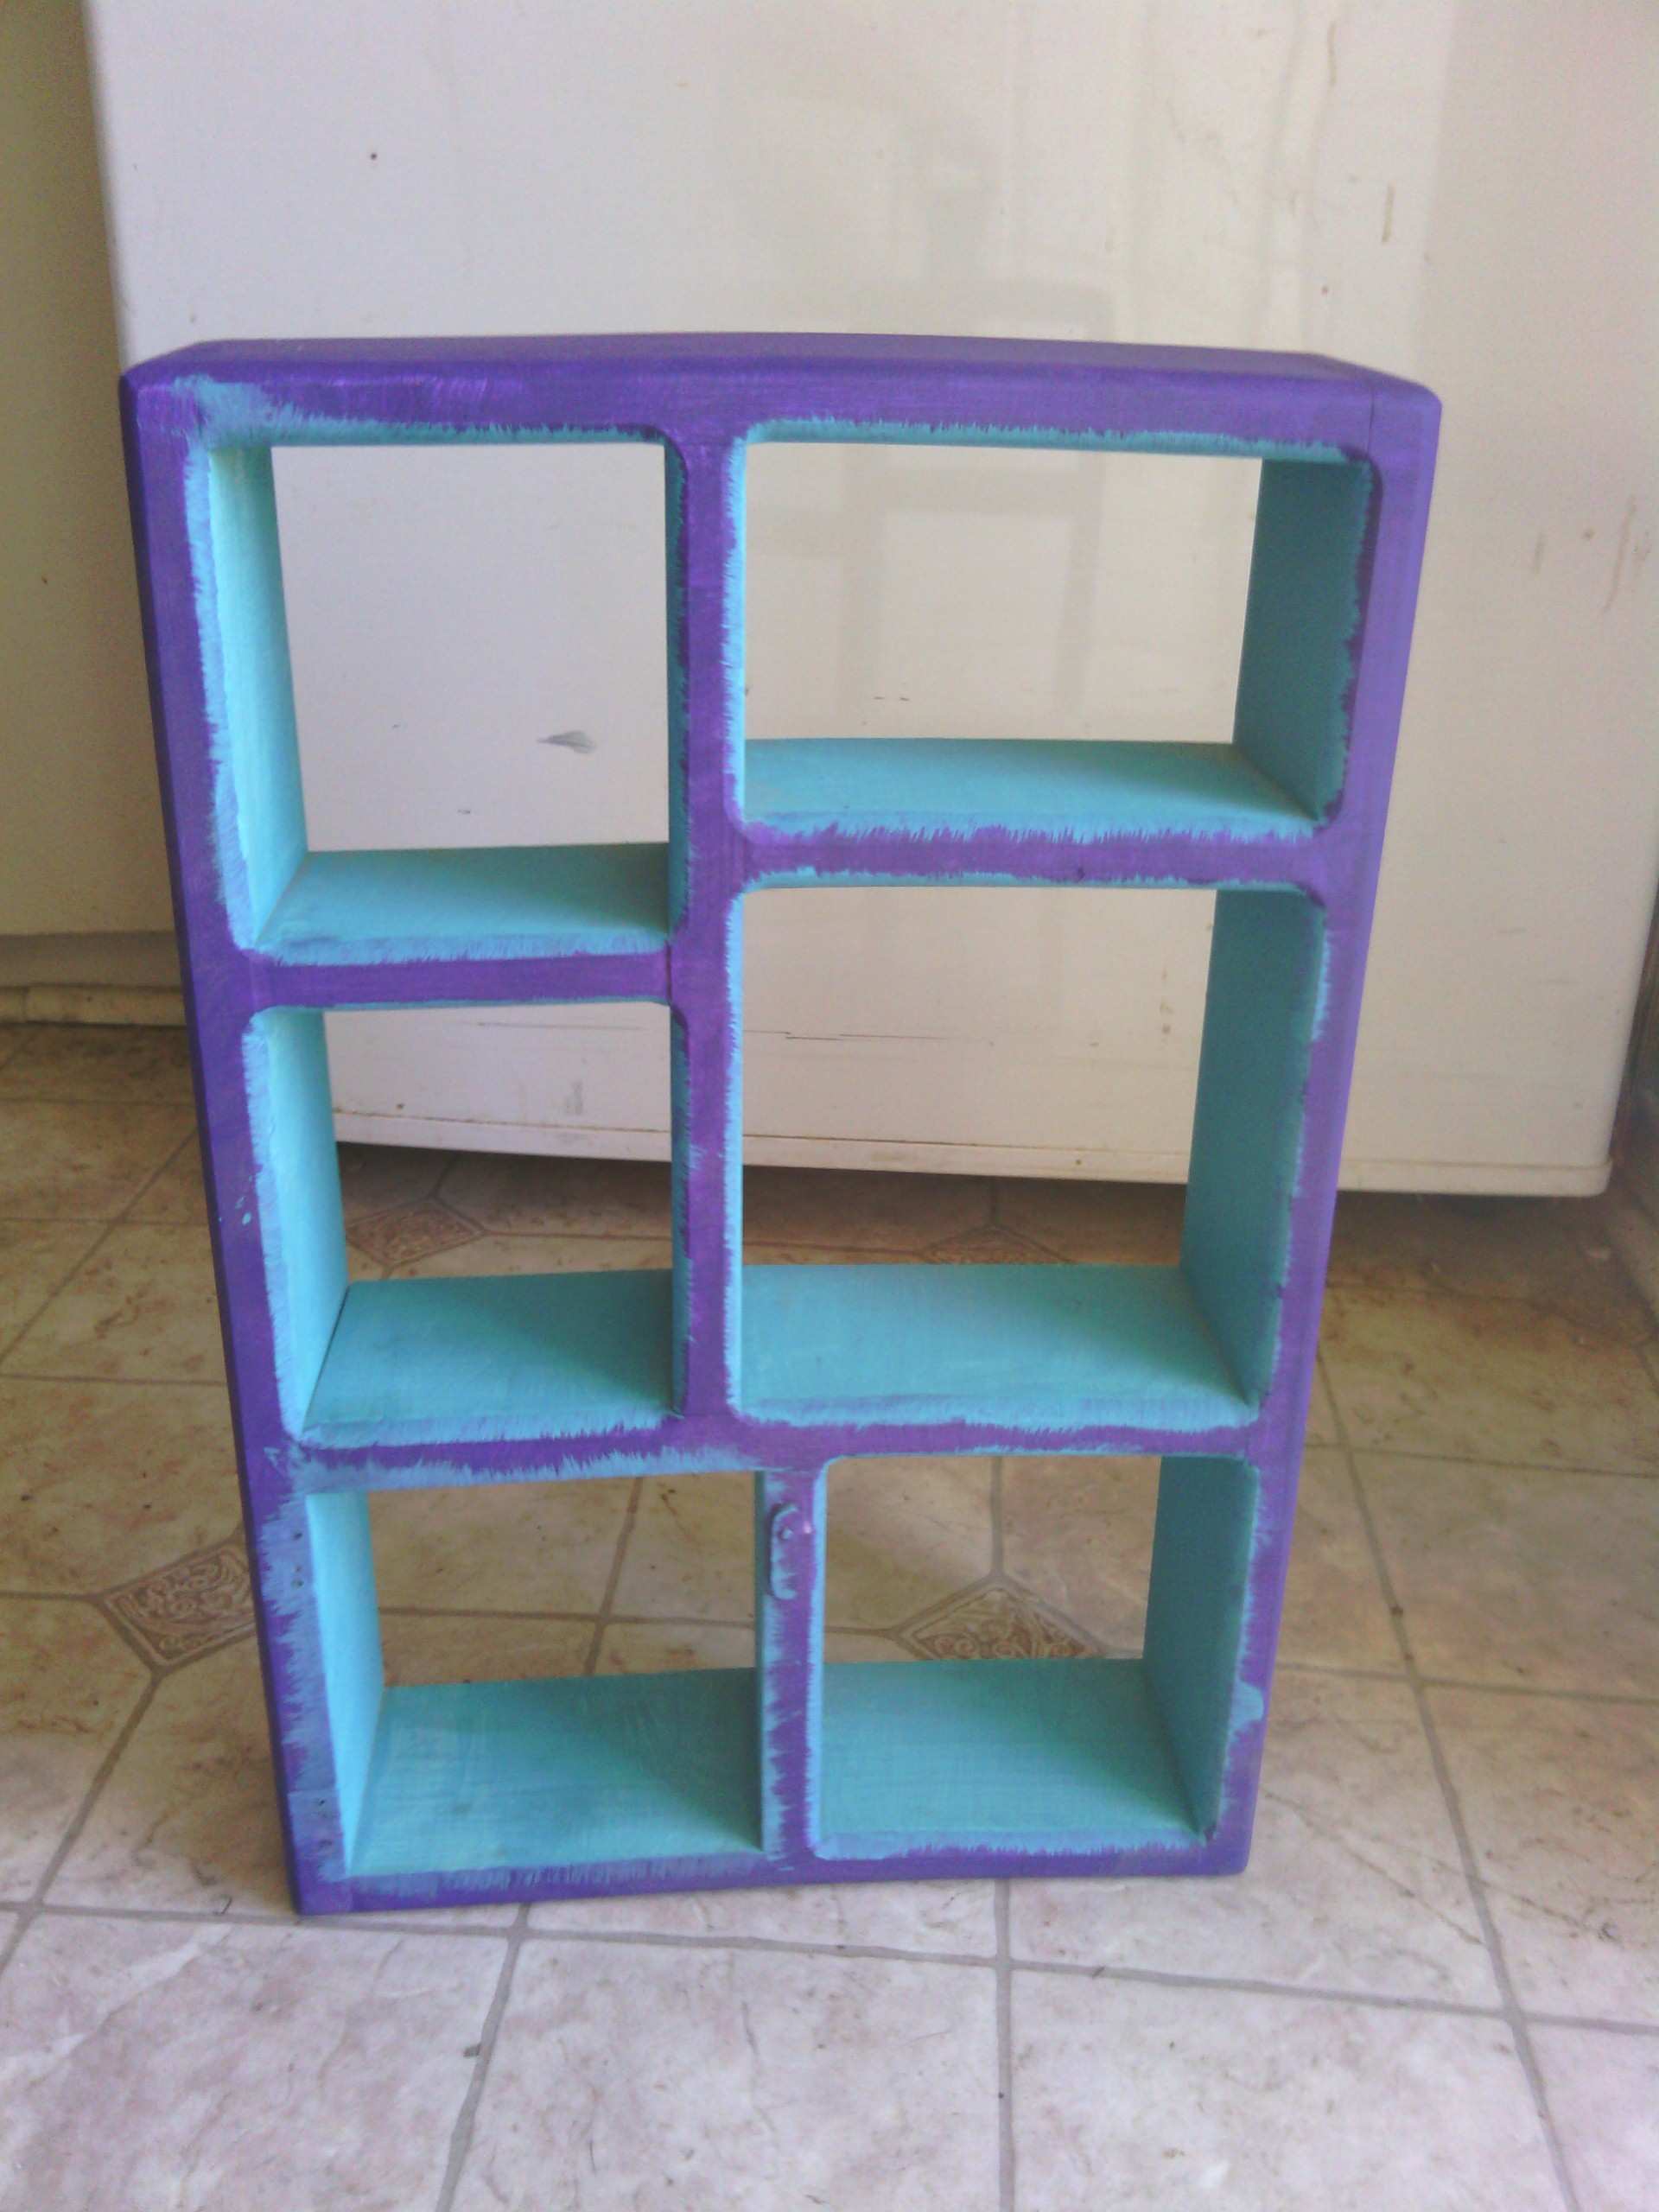 purple and turquoise shelf can be repainted